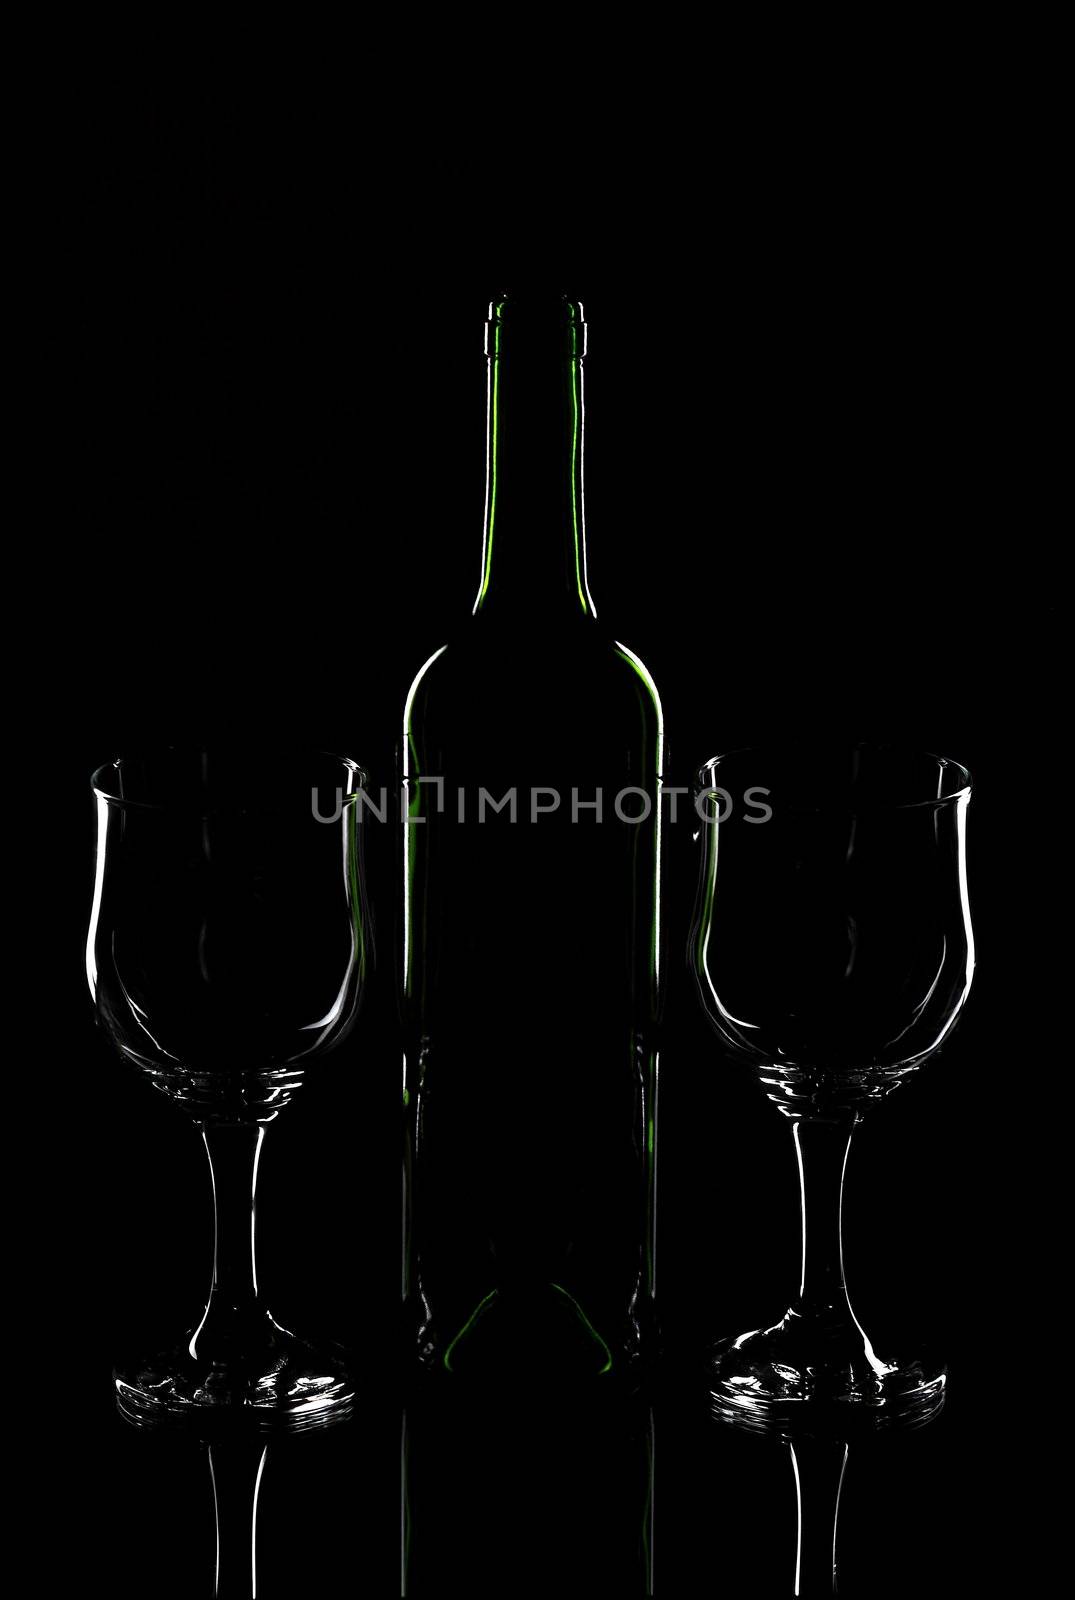 Wine bottle and wine glasses on a black background